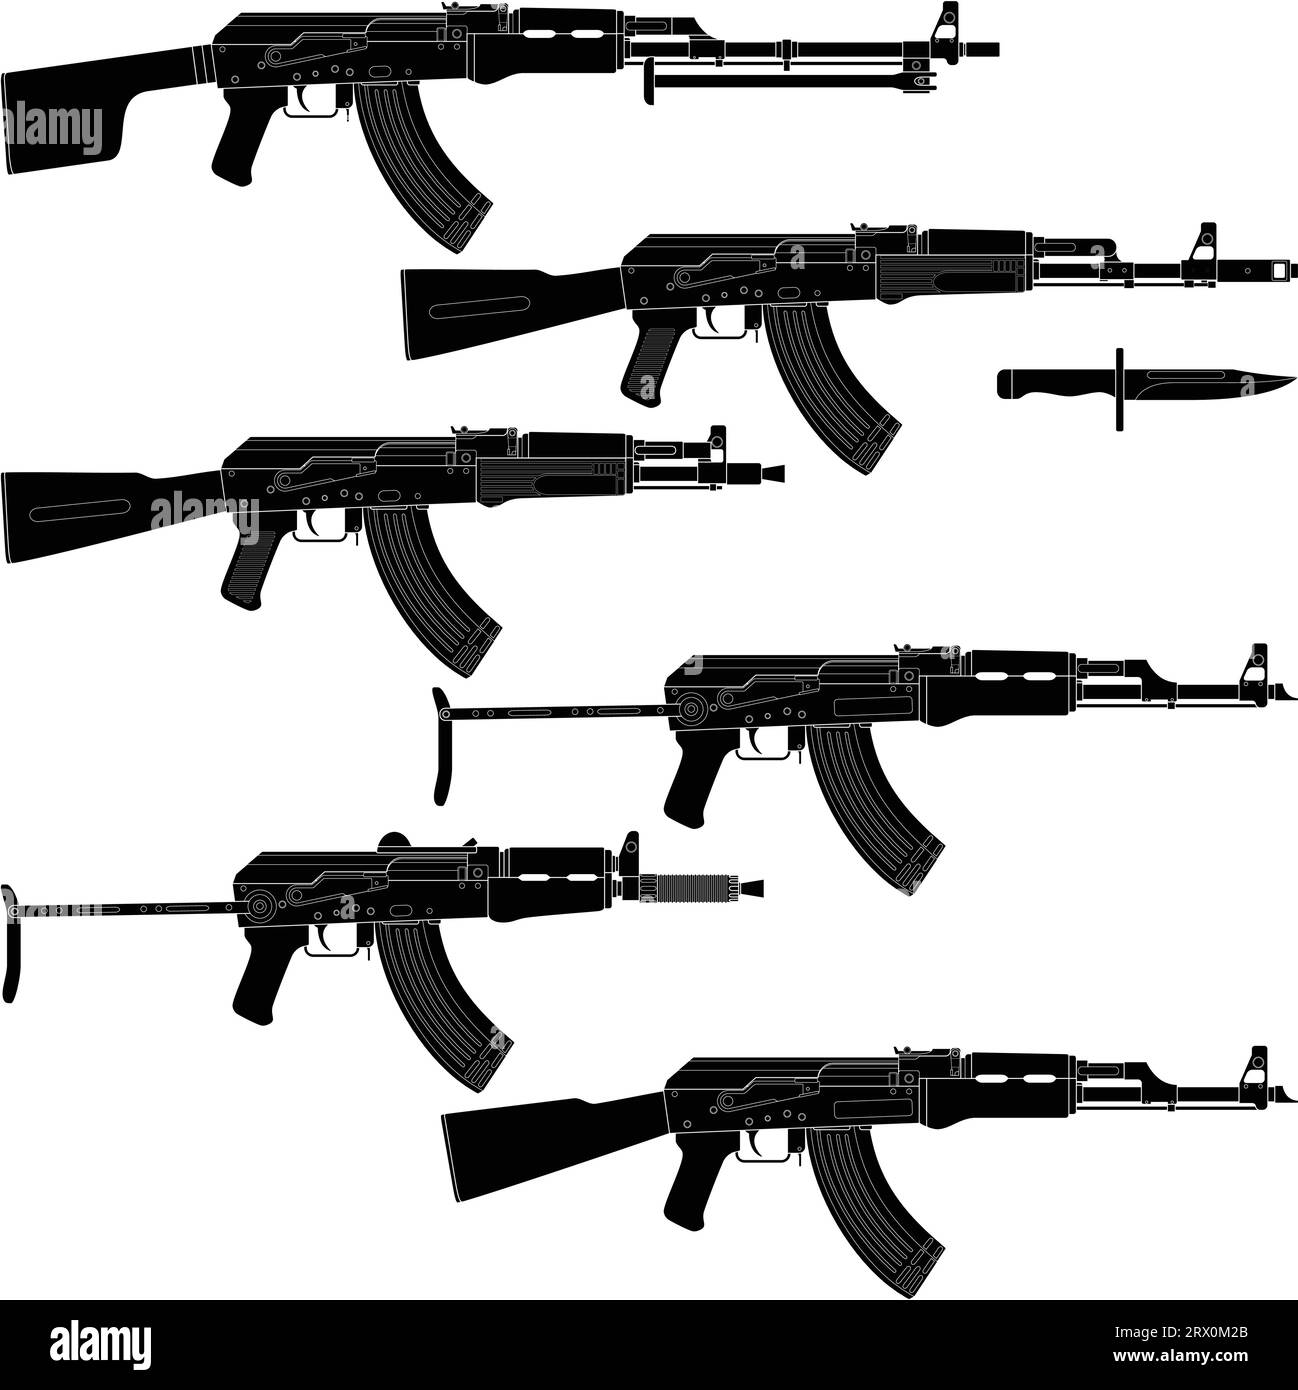 Layered vector illustration of collected  Assault rifles. Stock Vector